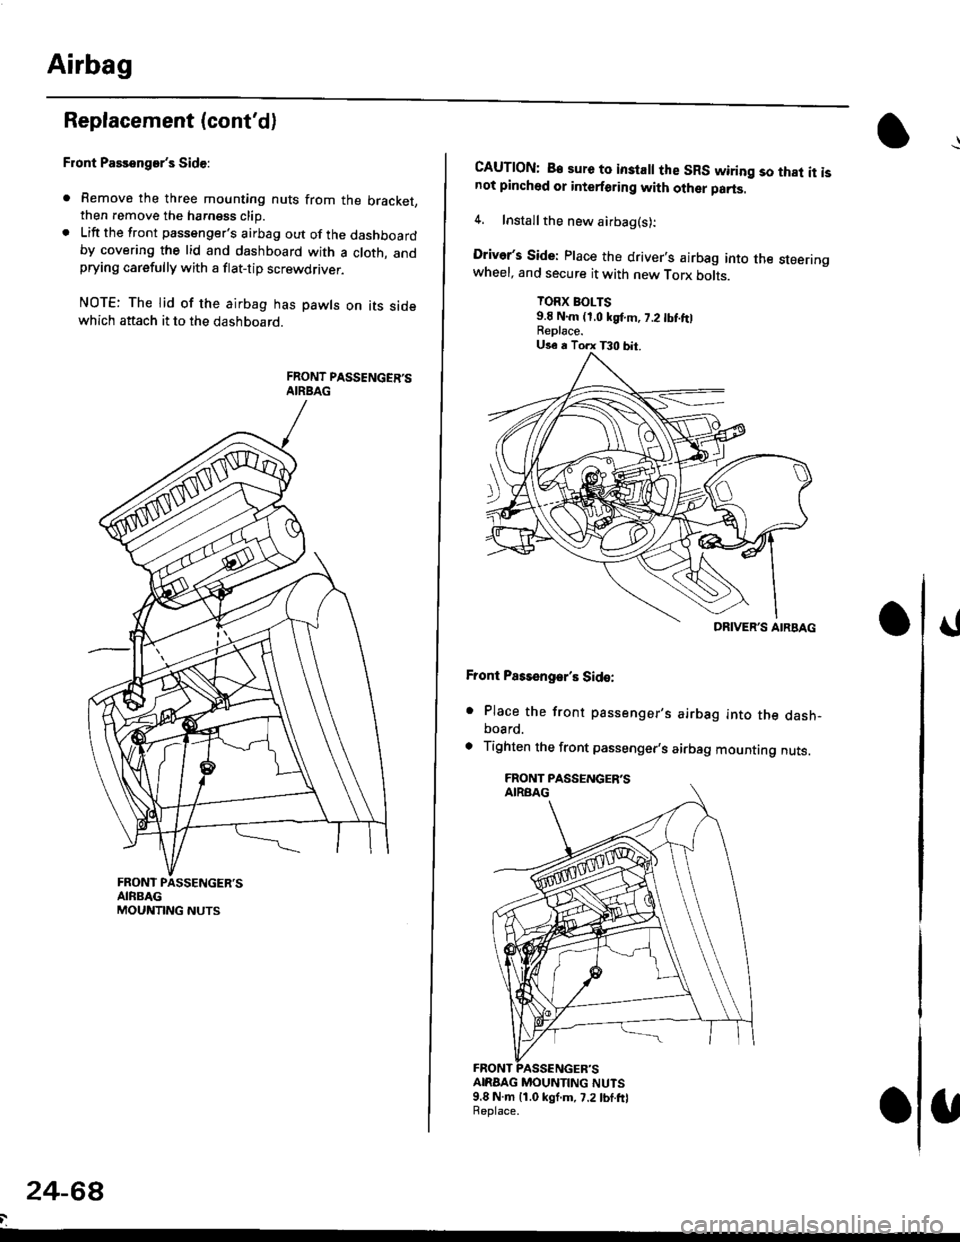 HONDA CIVIC 1996 6.G Repair Manual Airbag
Replacement (contd)
Front Passengers Side:
. Remove the three mounting nuts from the bracket,then remove the harngss clip.. Lift the front passengers airbag out of the dashboardby covering t